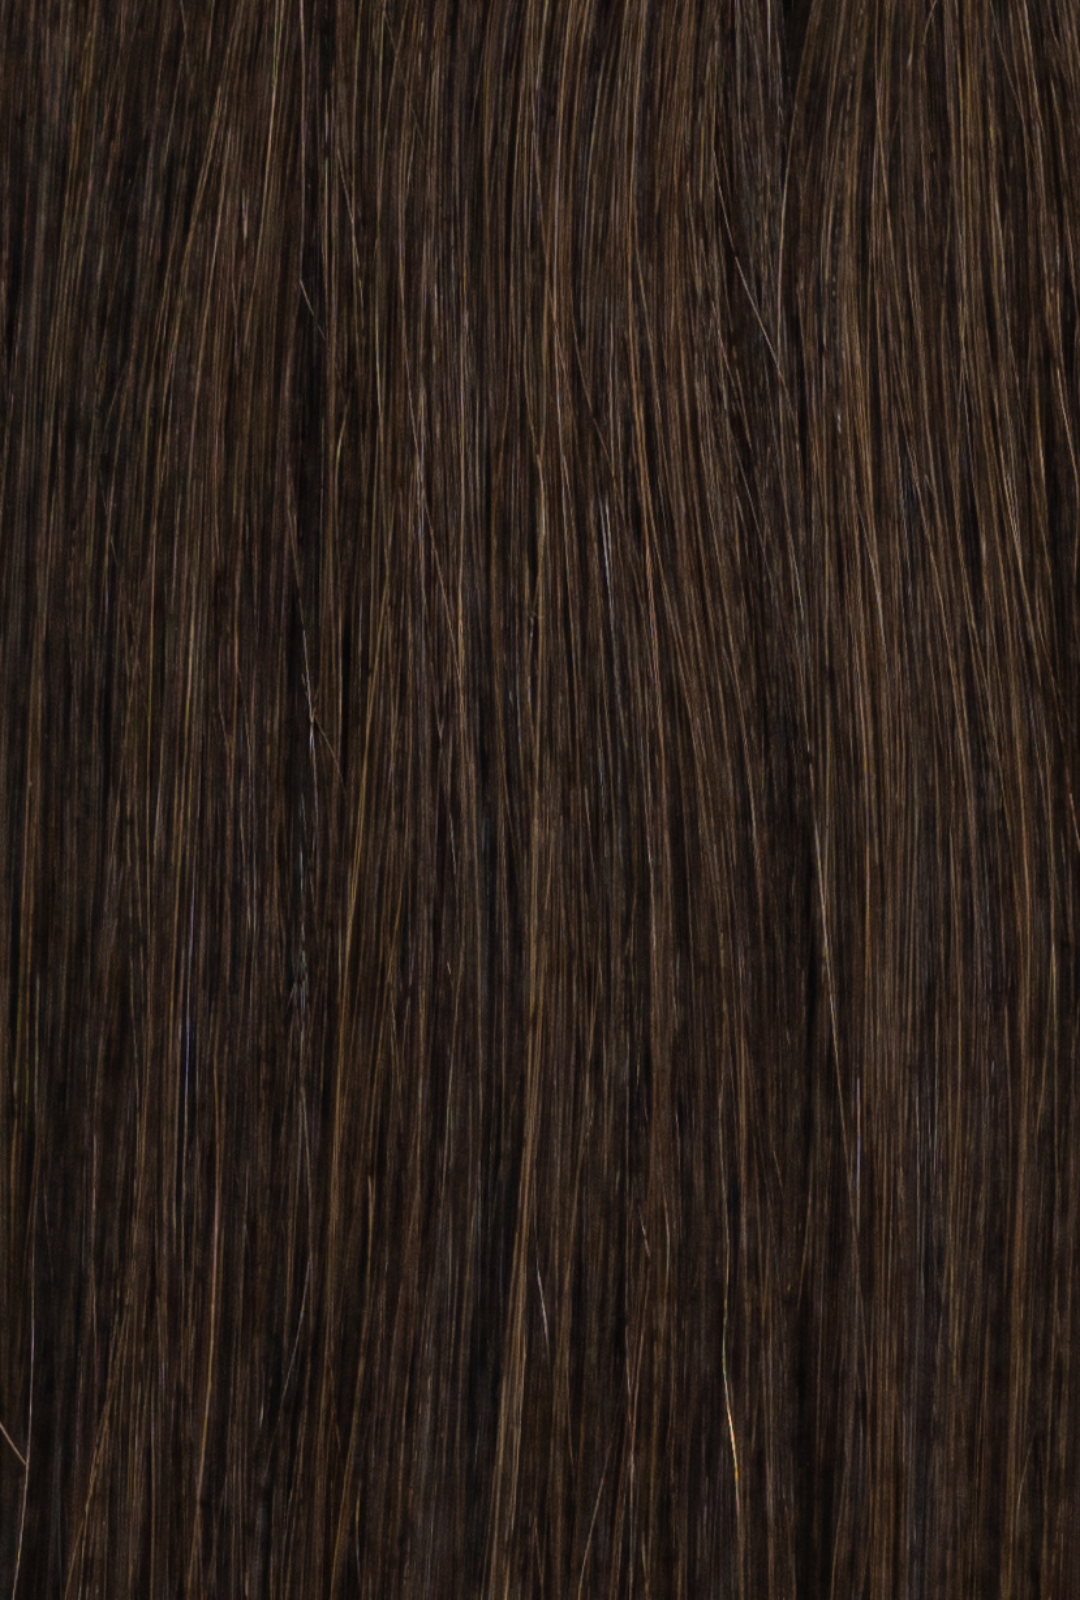 Waved by Laced Hair Machine Sewn Weft Extensions #2 (Chocolate)